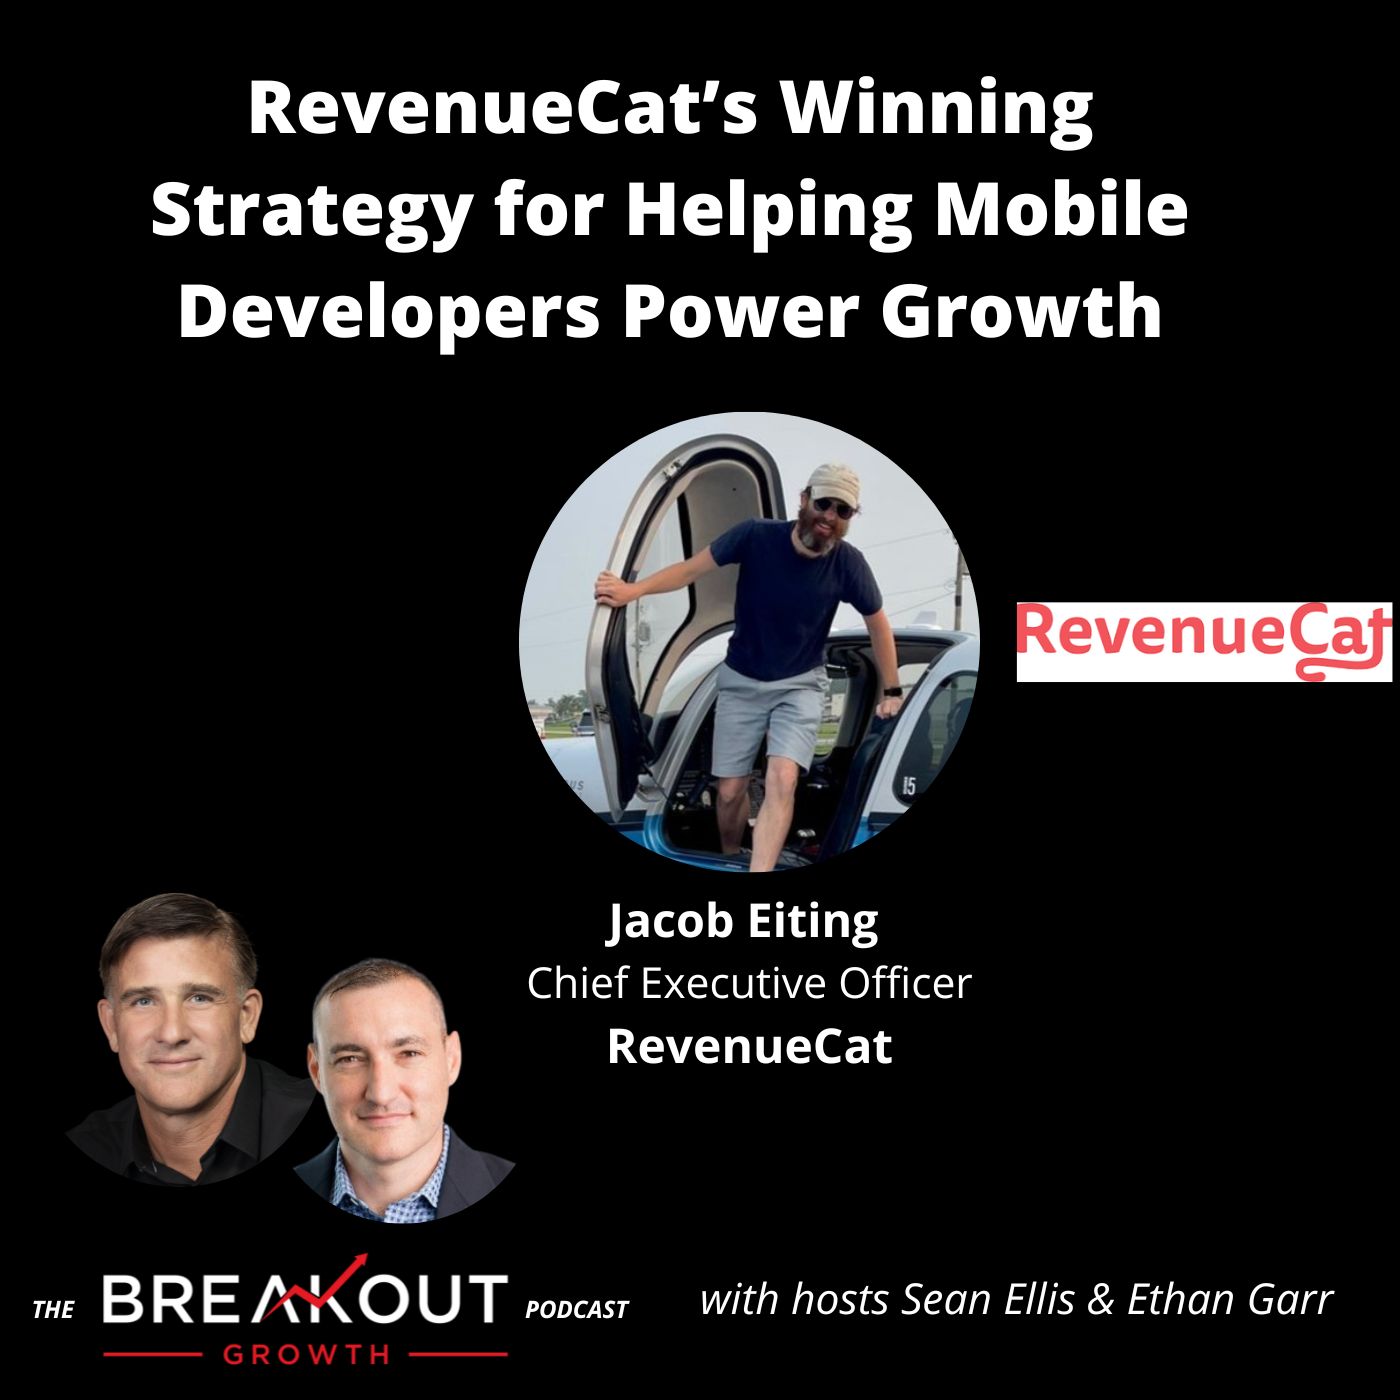 RevenueCat’s Winning Strategy for Helping Mobile Developers Power Growth